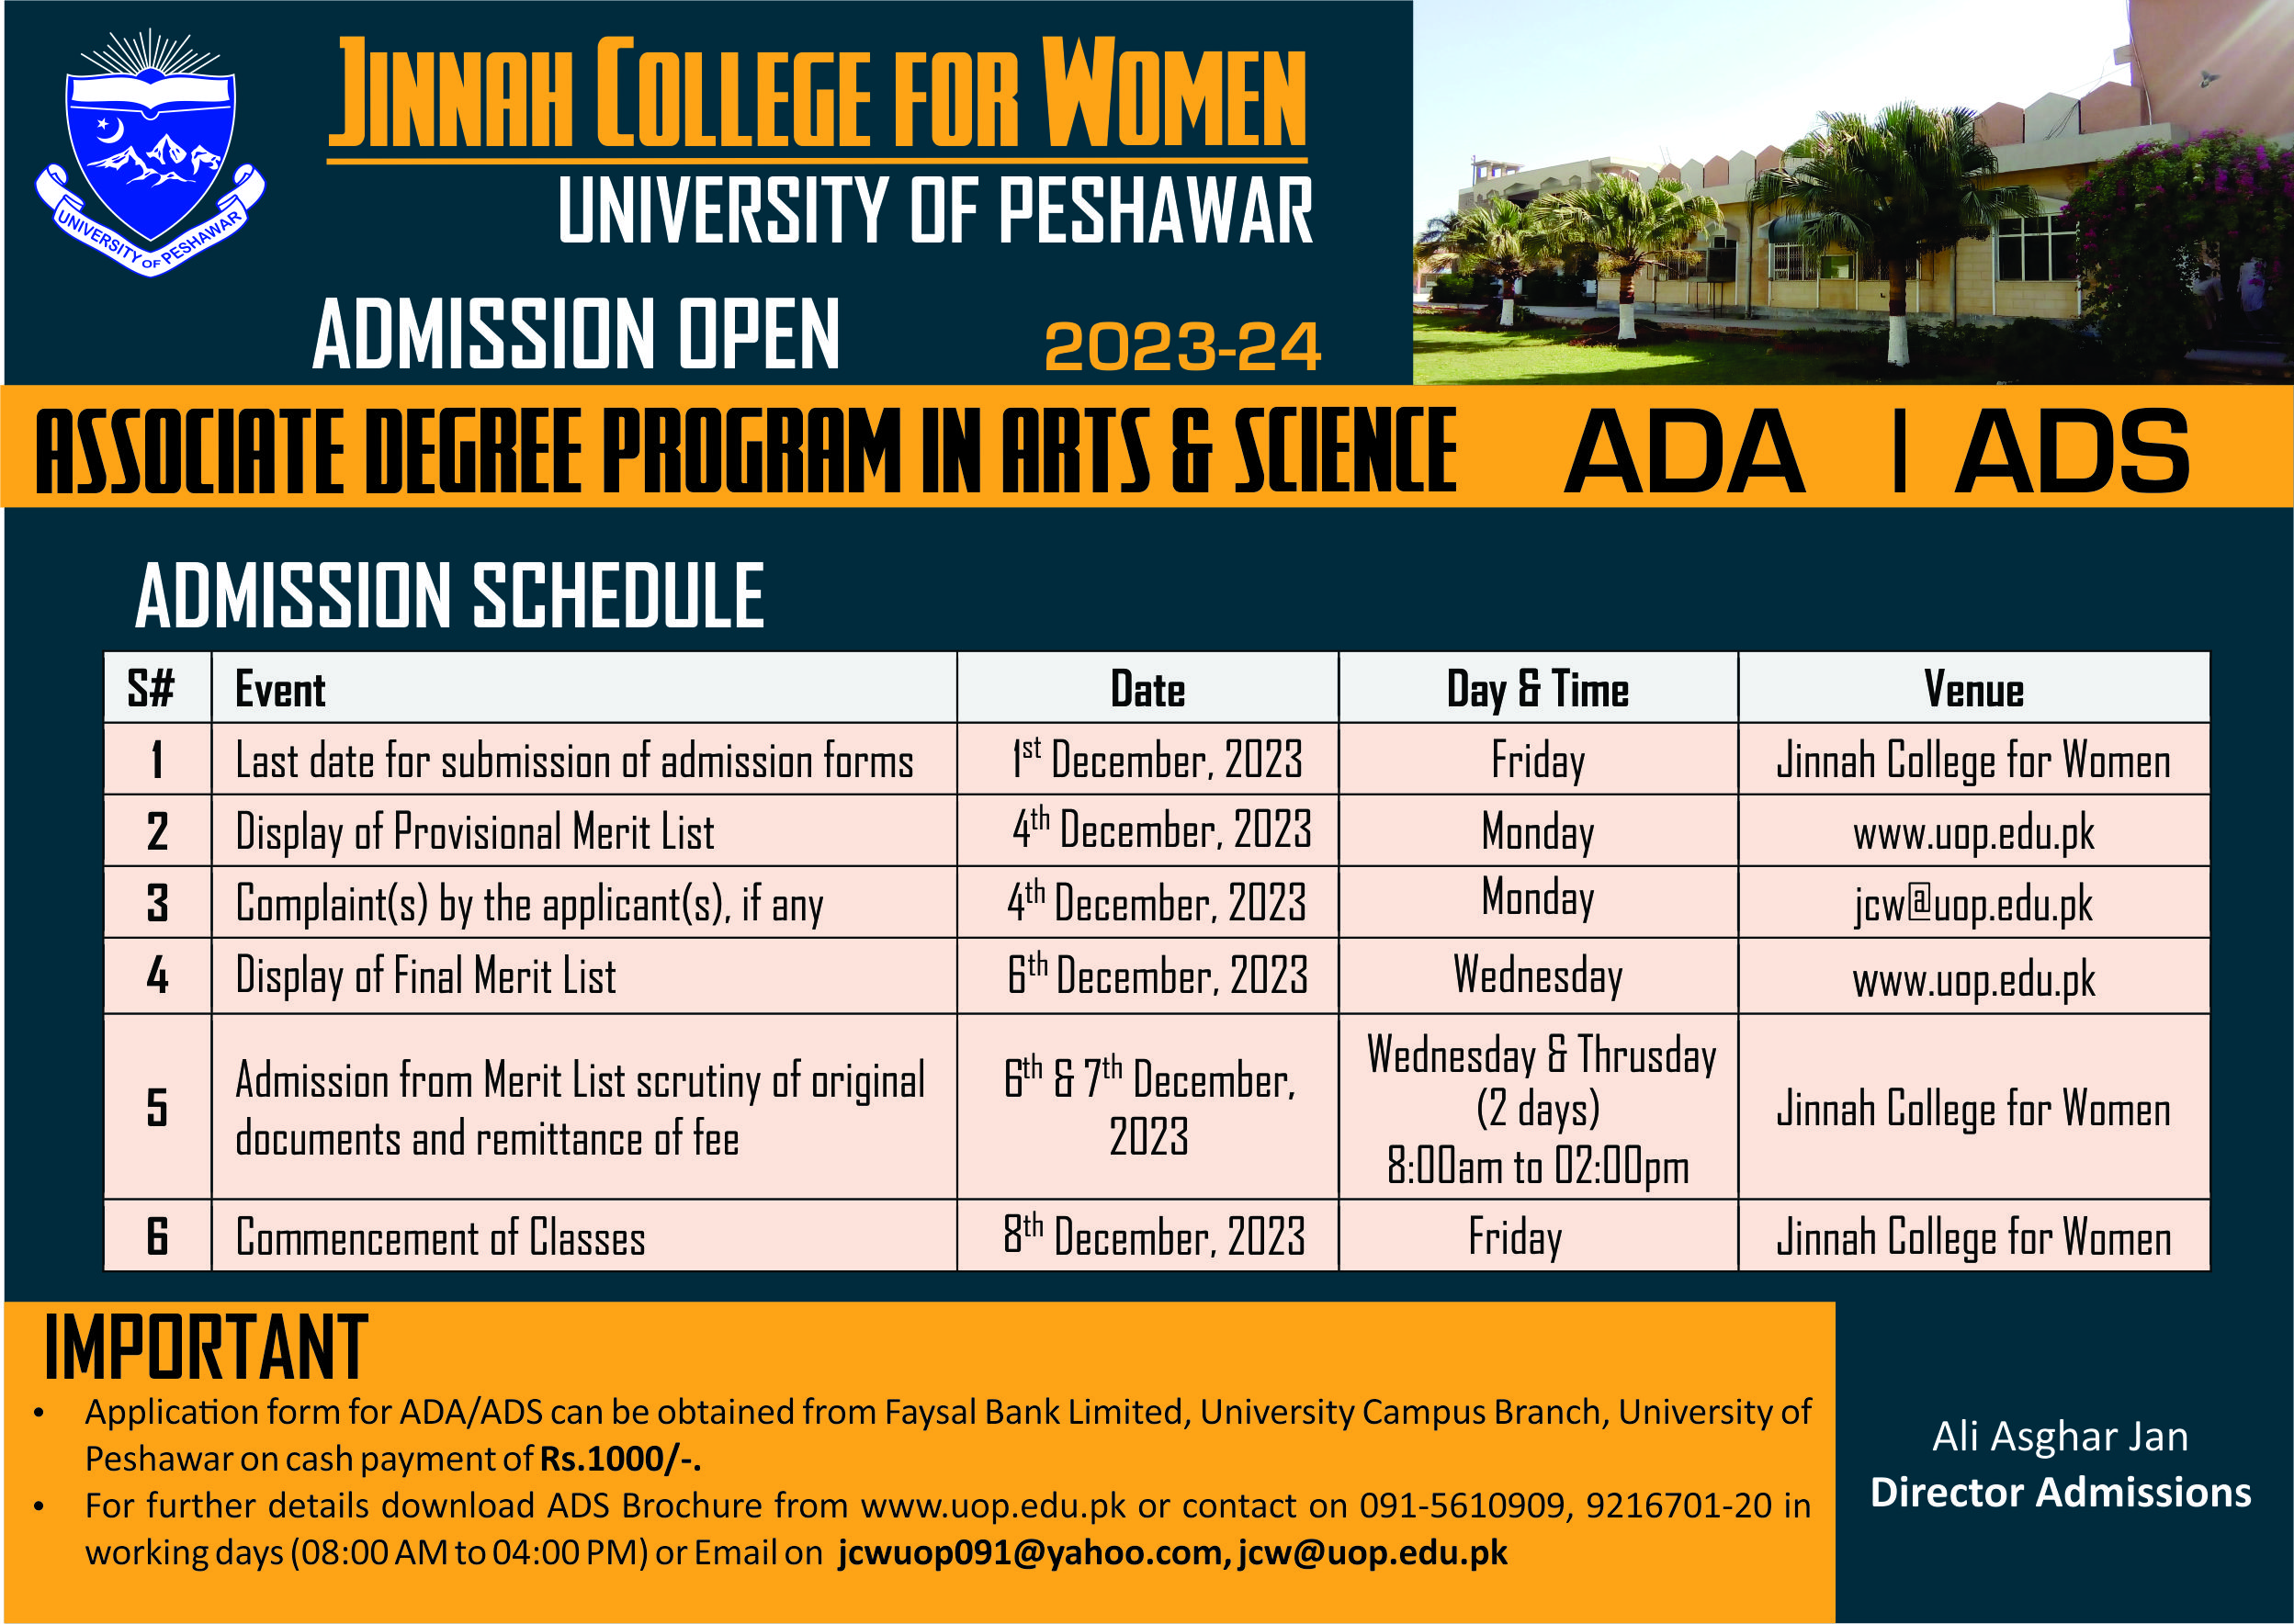 admissions open in JCW, UOP